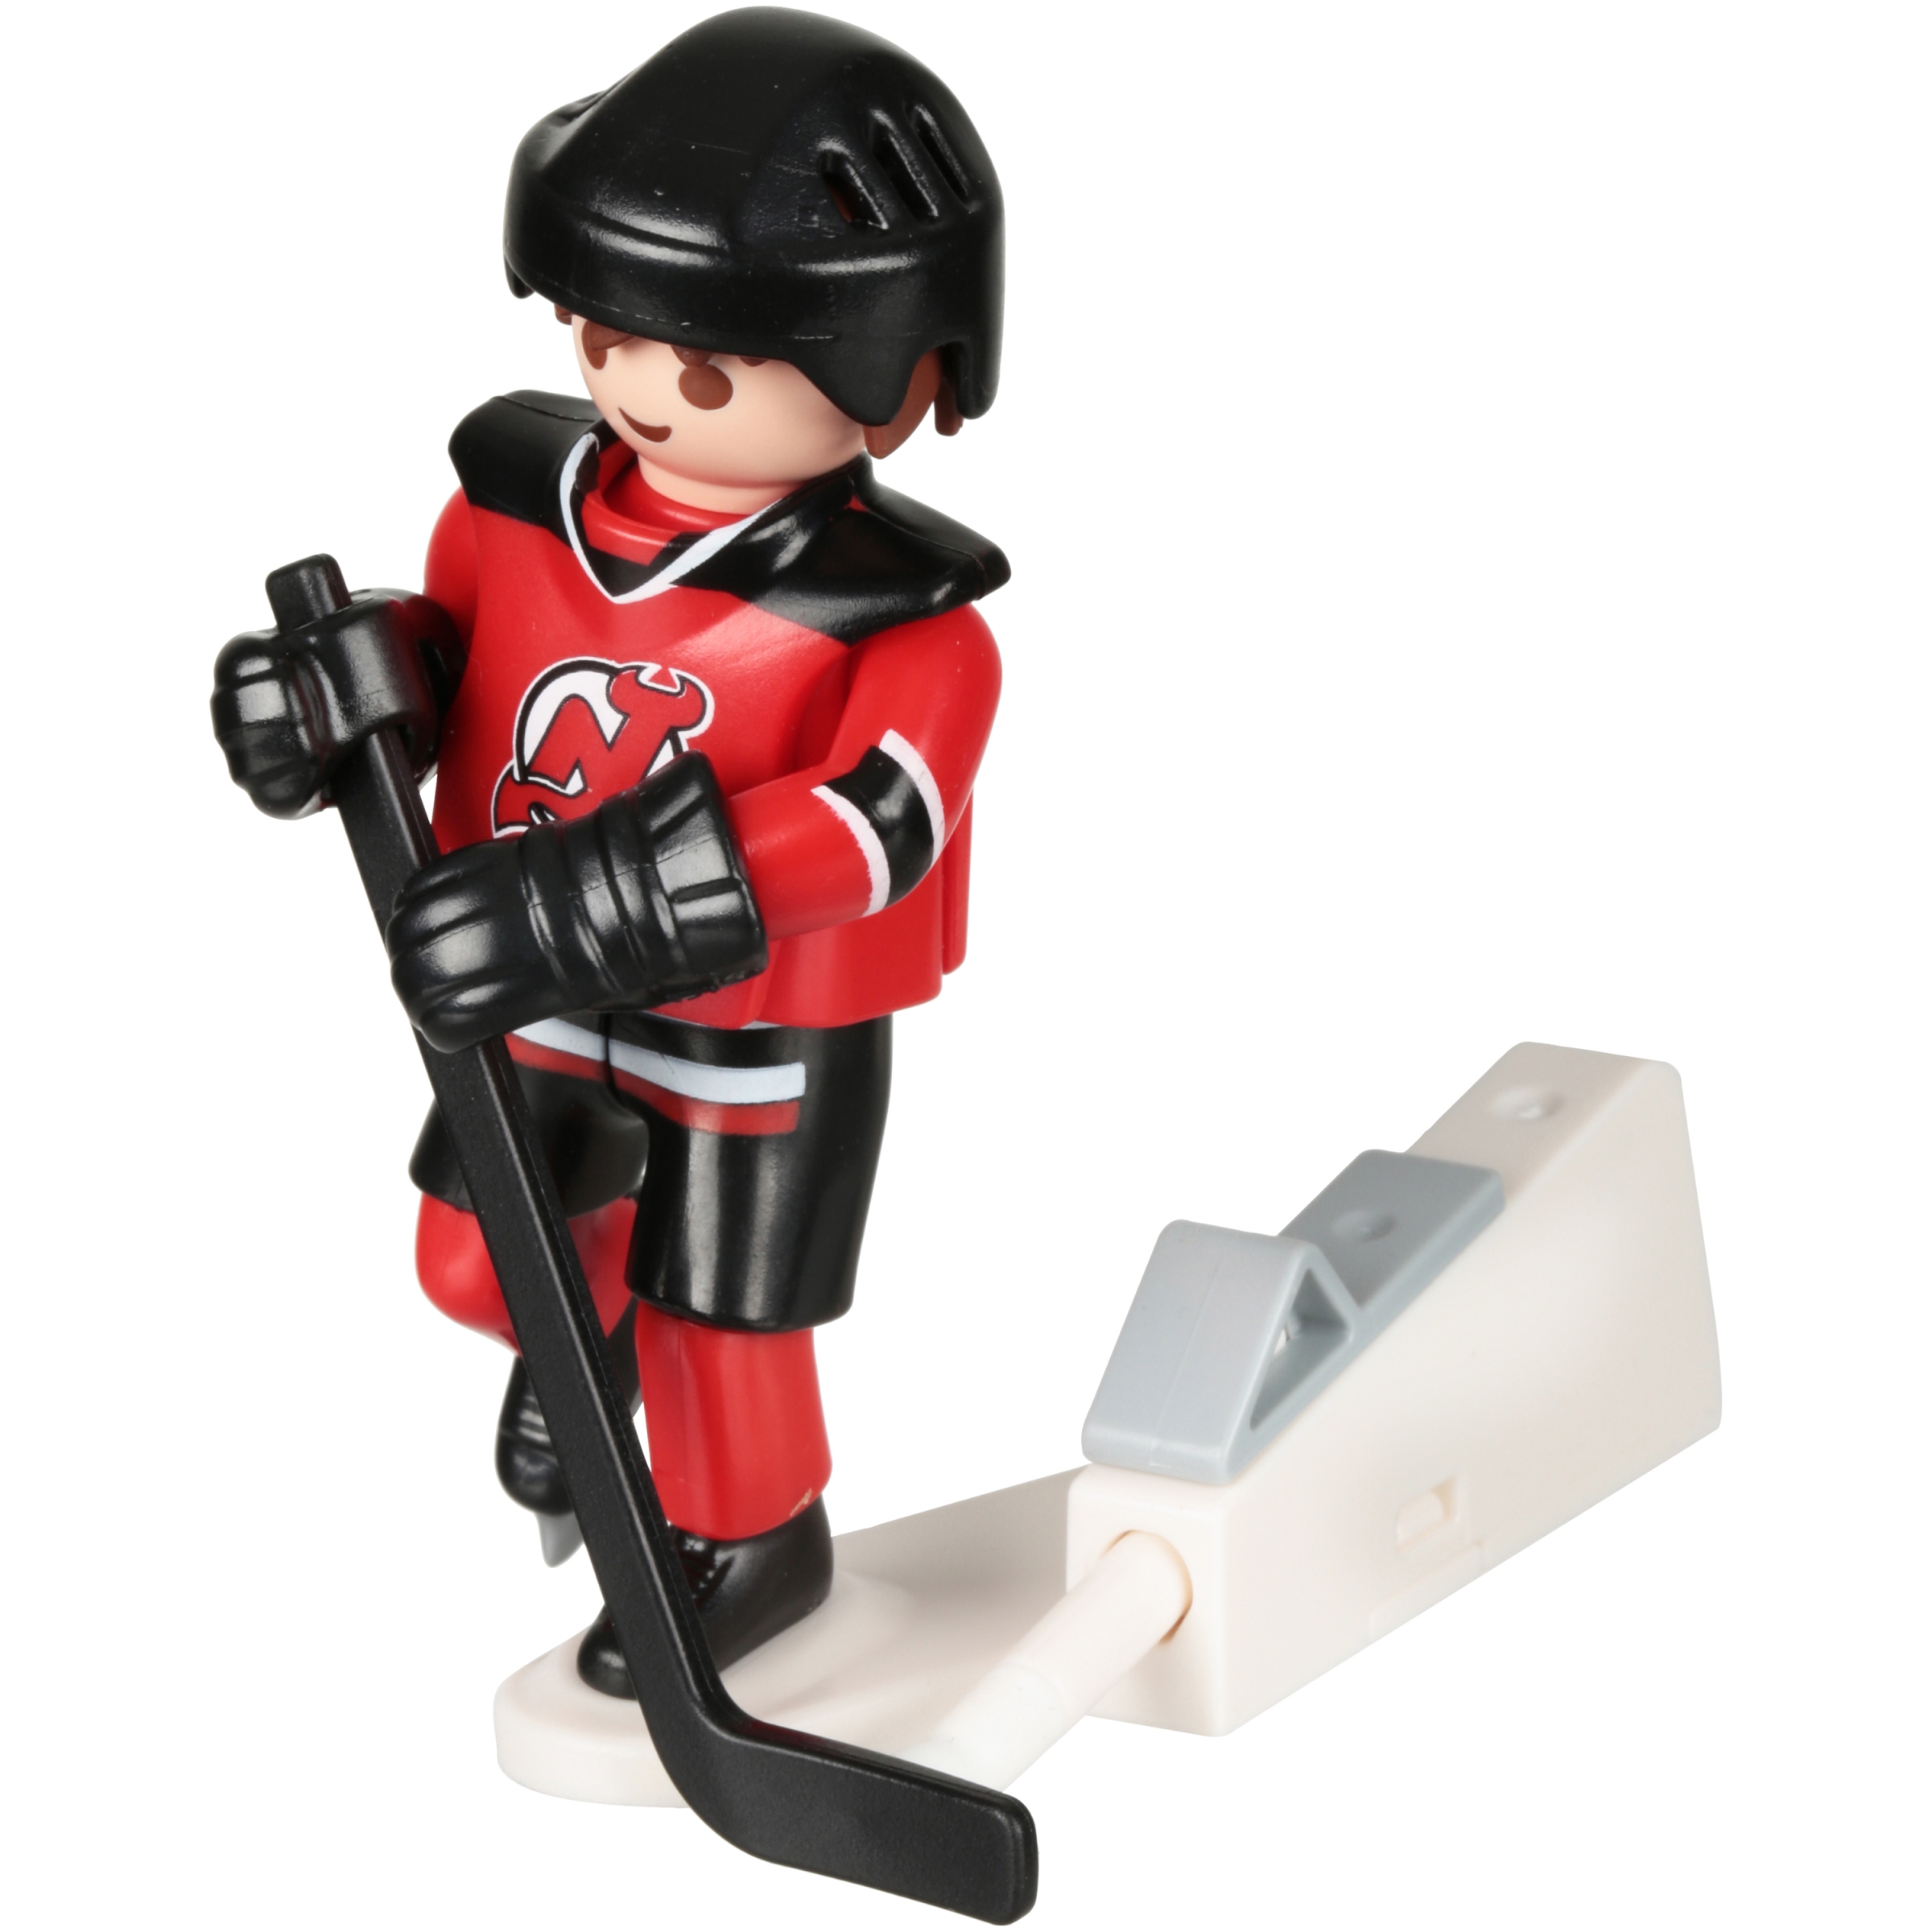 PLAYMOBIL NHL New Jersey Devils Player Figure - image 3 of 4